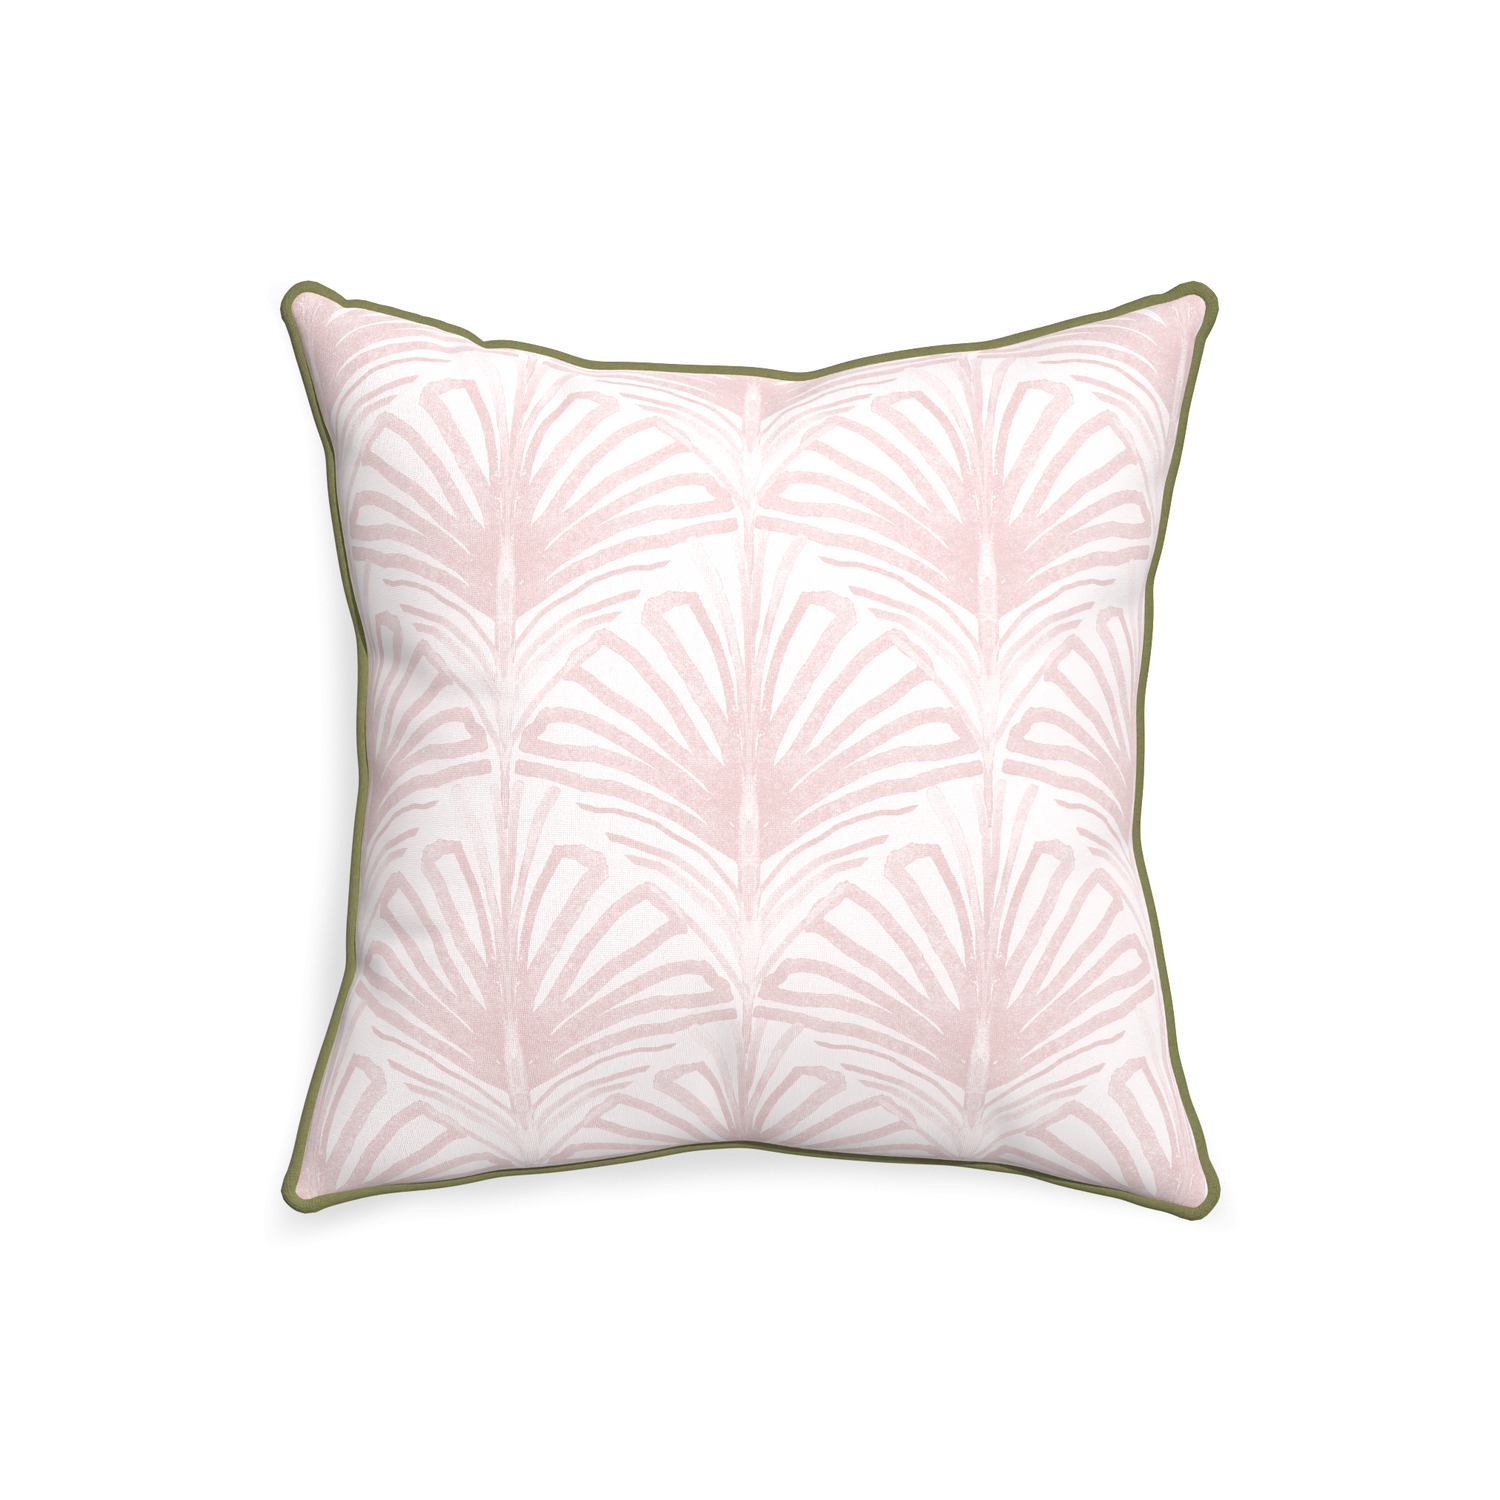 20-square suzy rose custom pillow with moss piping on white background